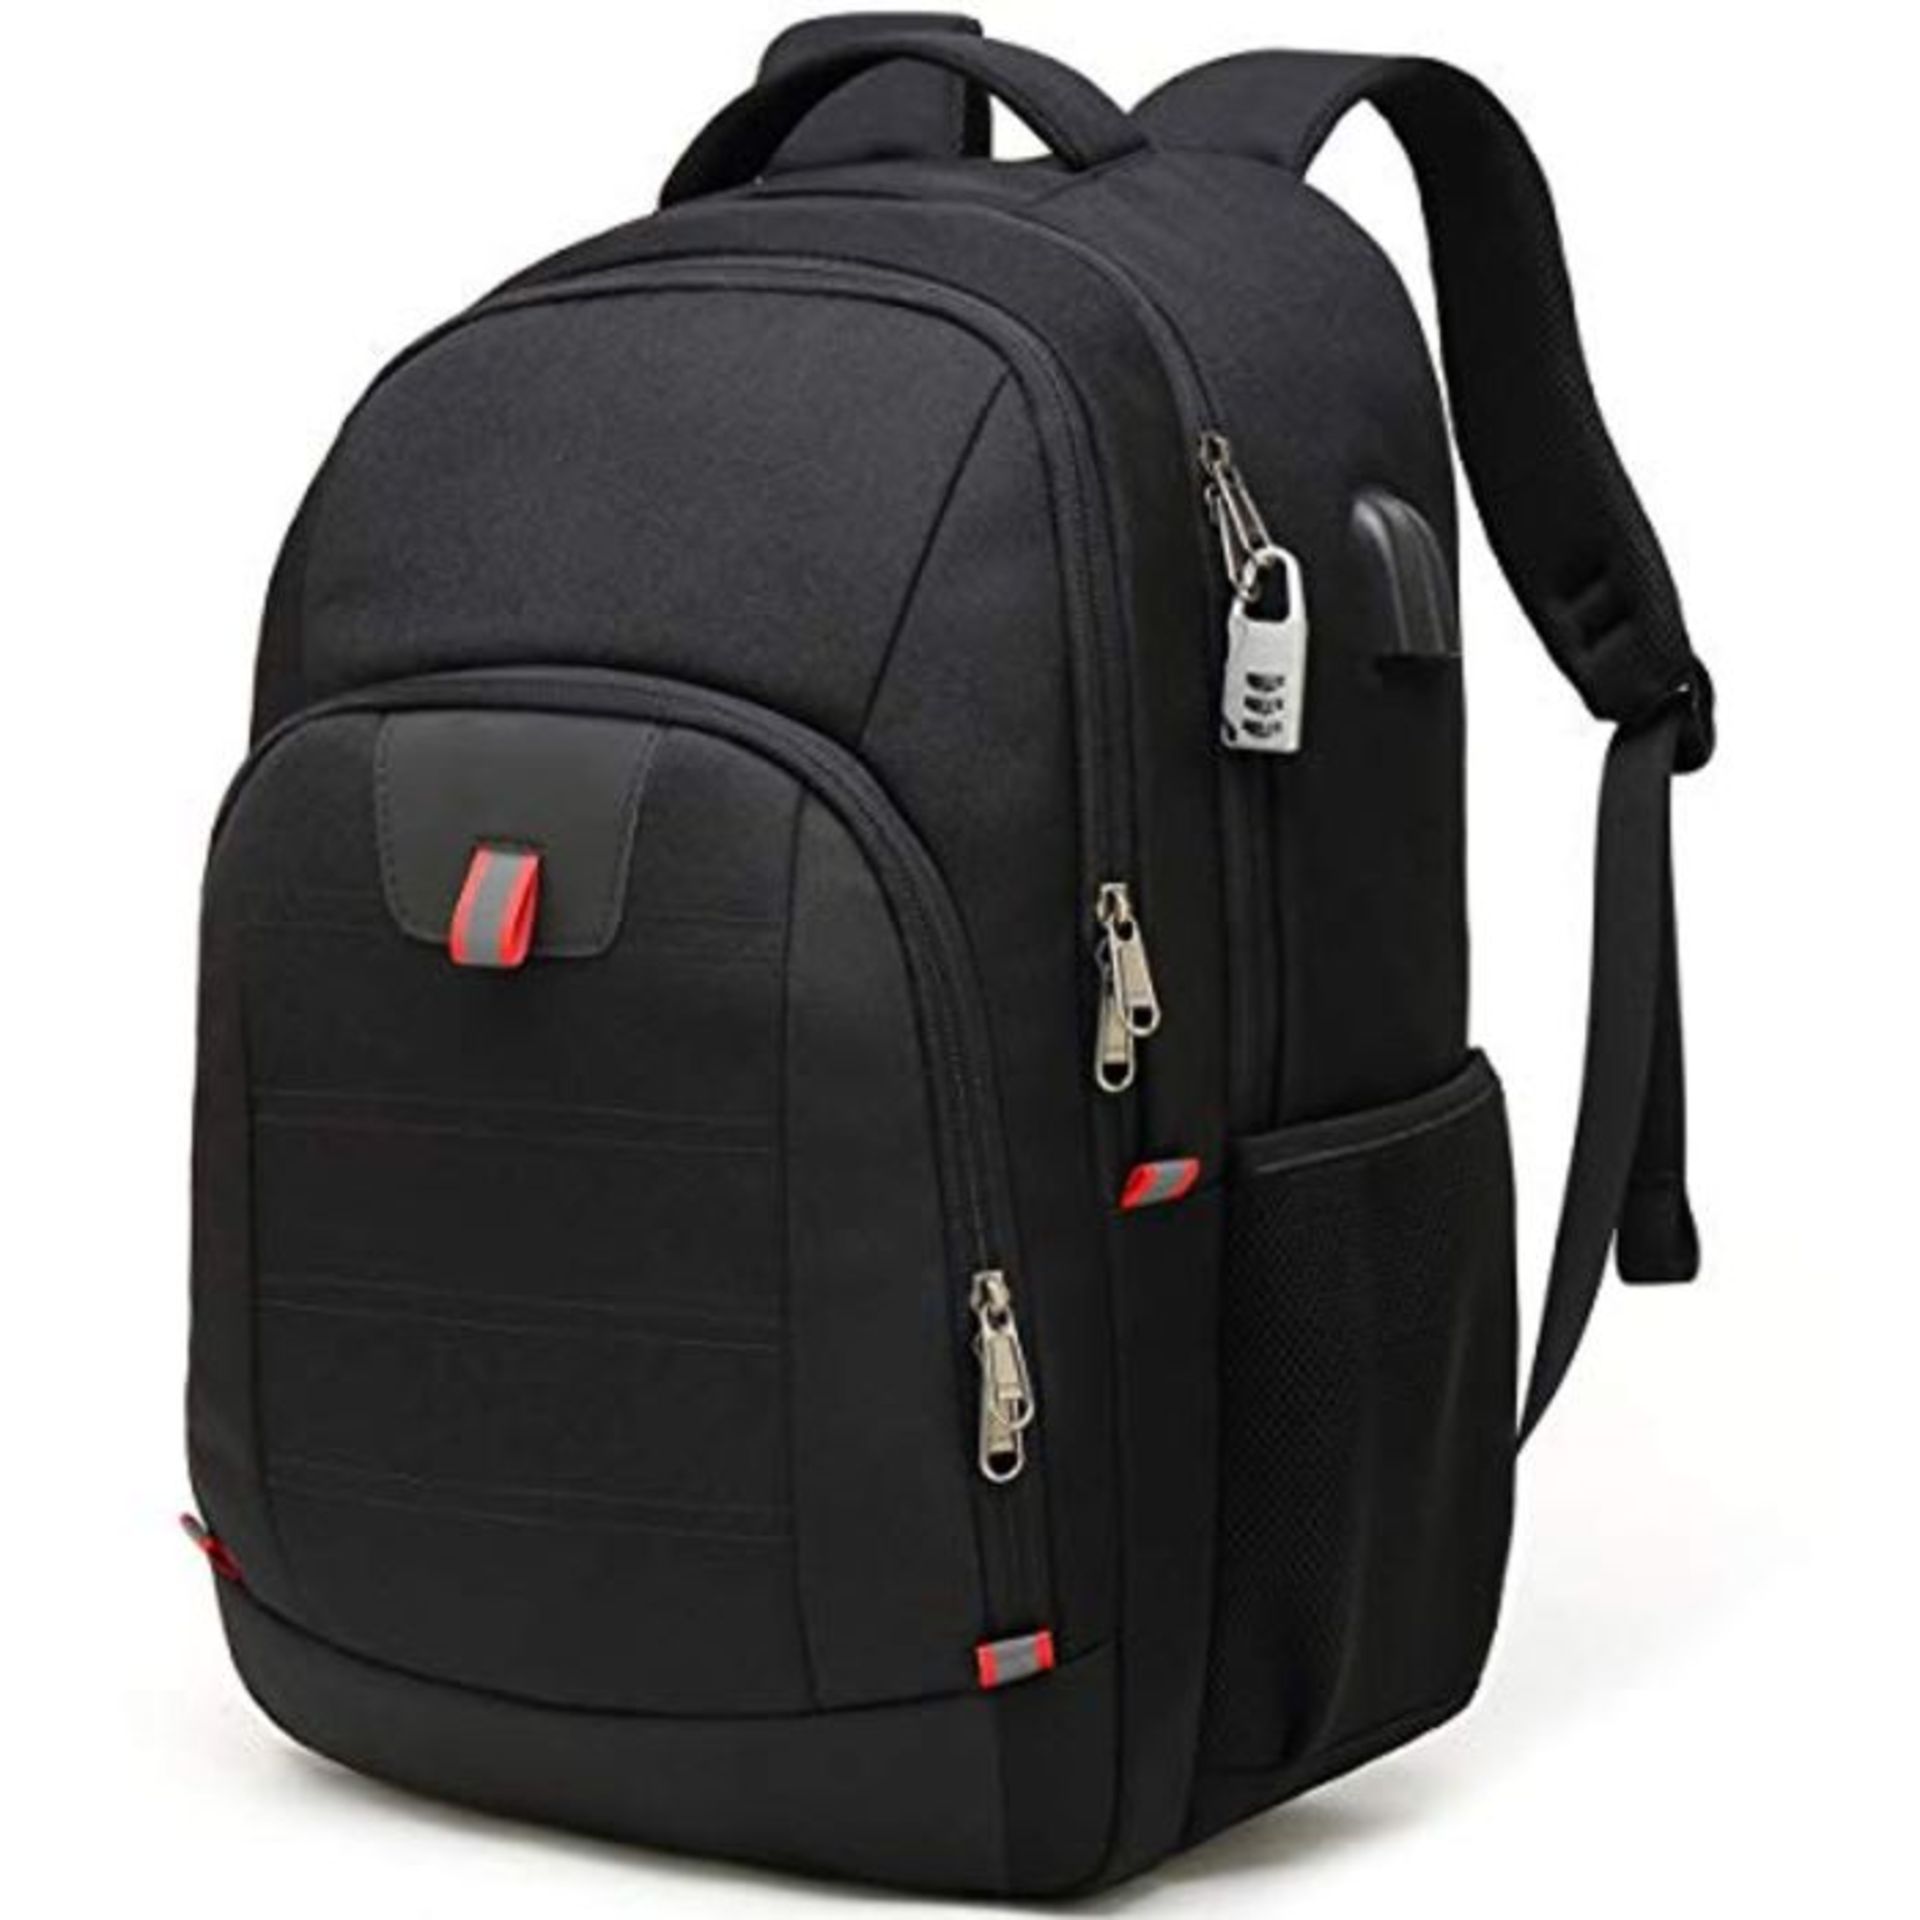 Laptop Backpack,Extra Large Anti-Theft Business Travel Laptop Backpack Bag with USB Ch